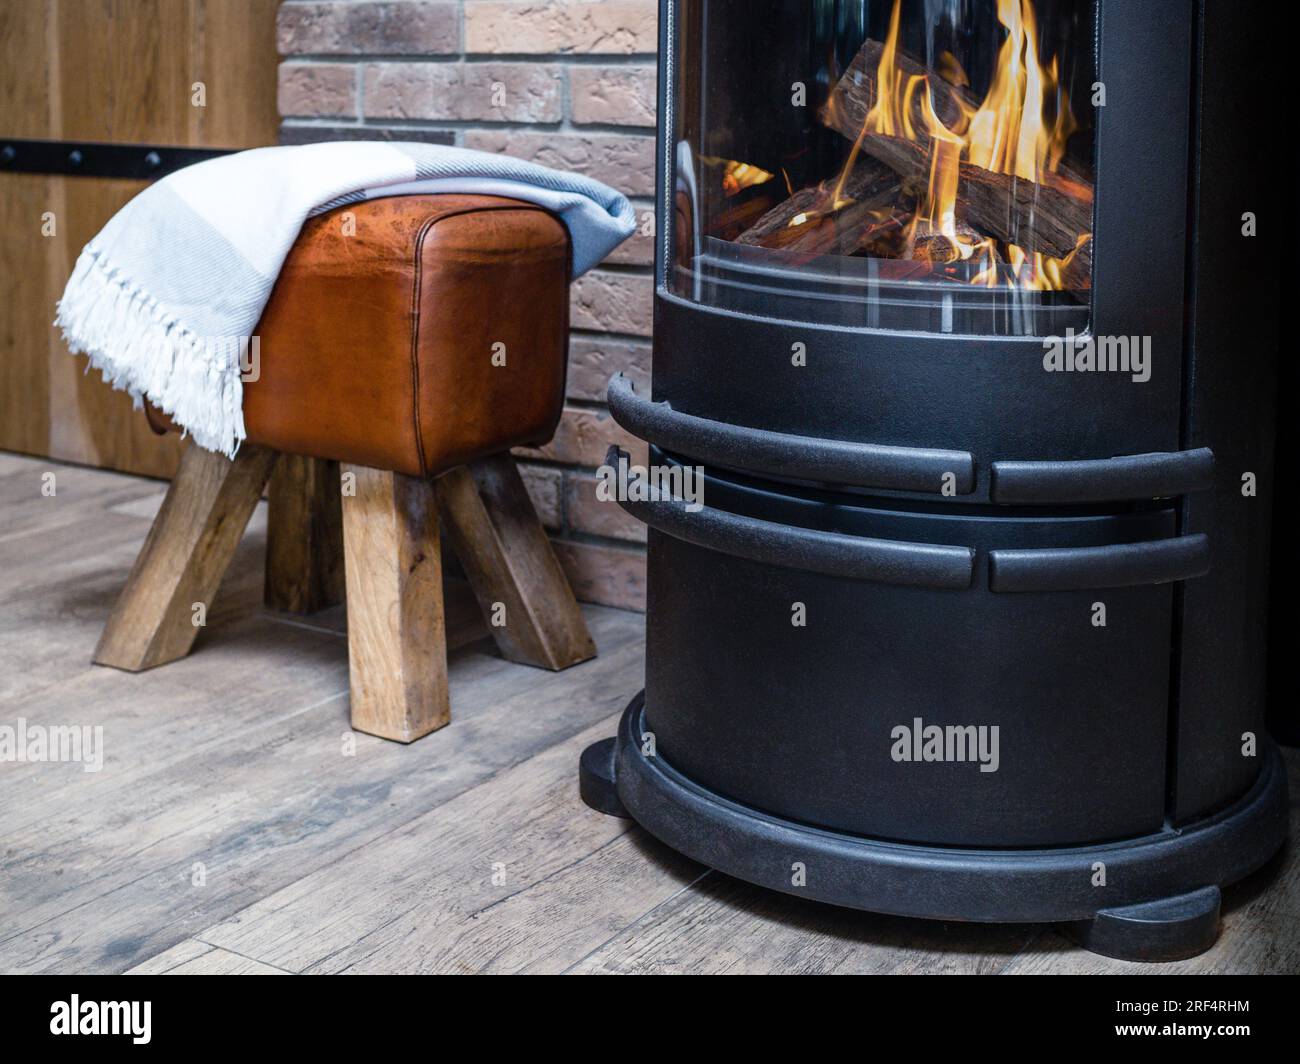 Cosy metal stove fireplace with burning flame behind a glass door and leather stool and blanket.  Stock Photo